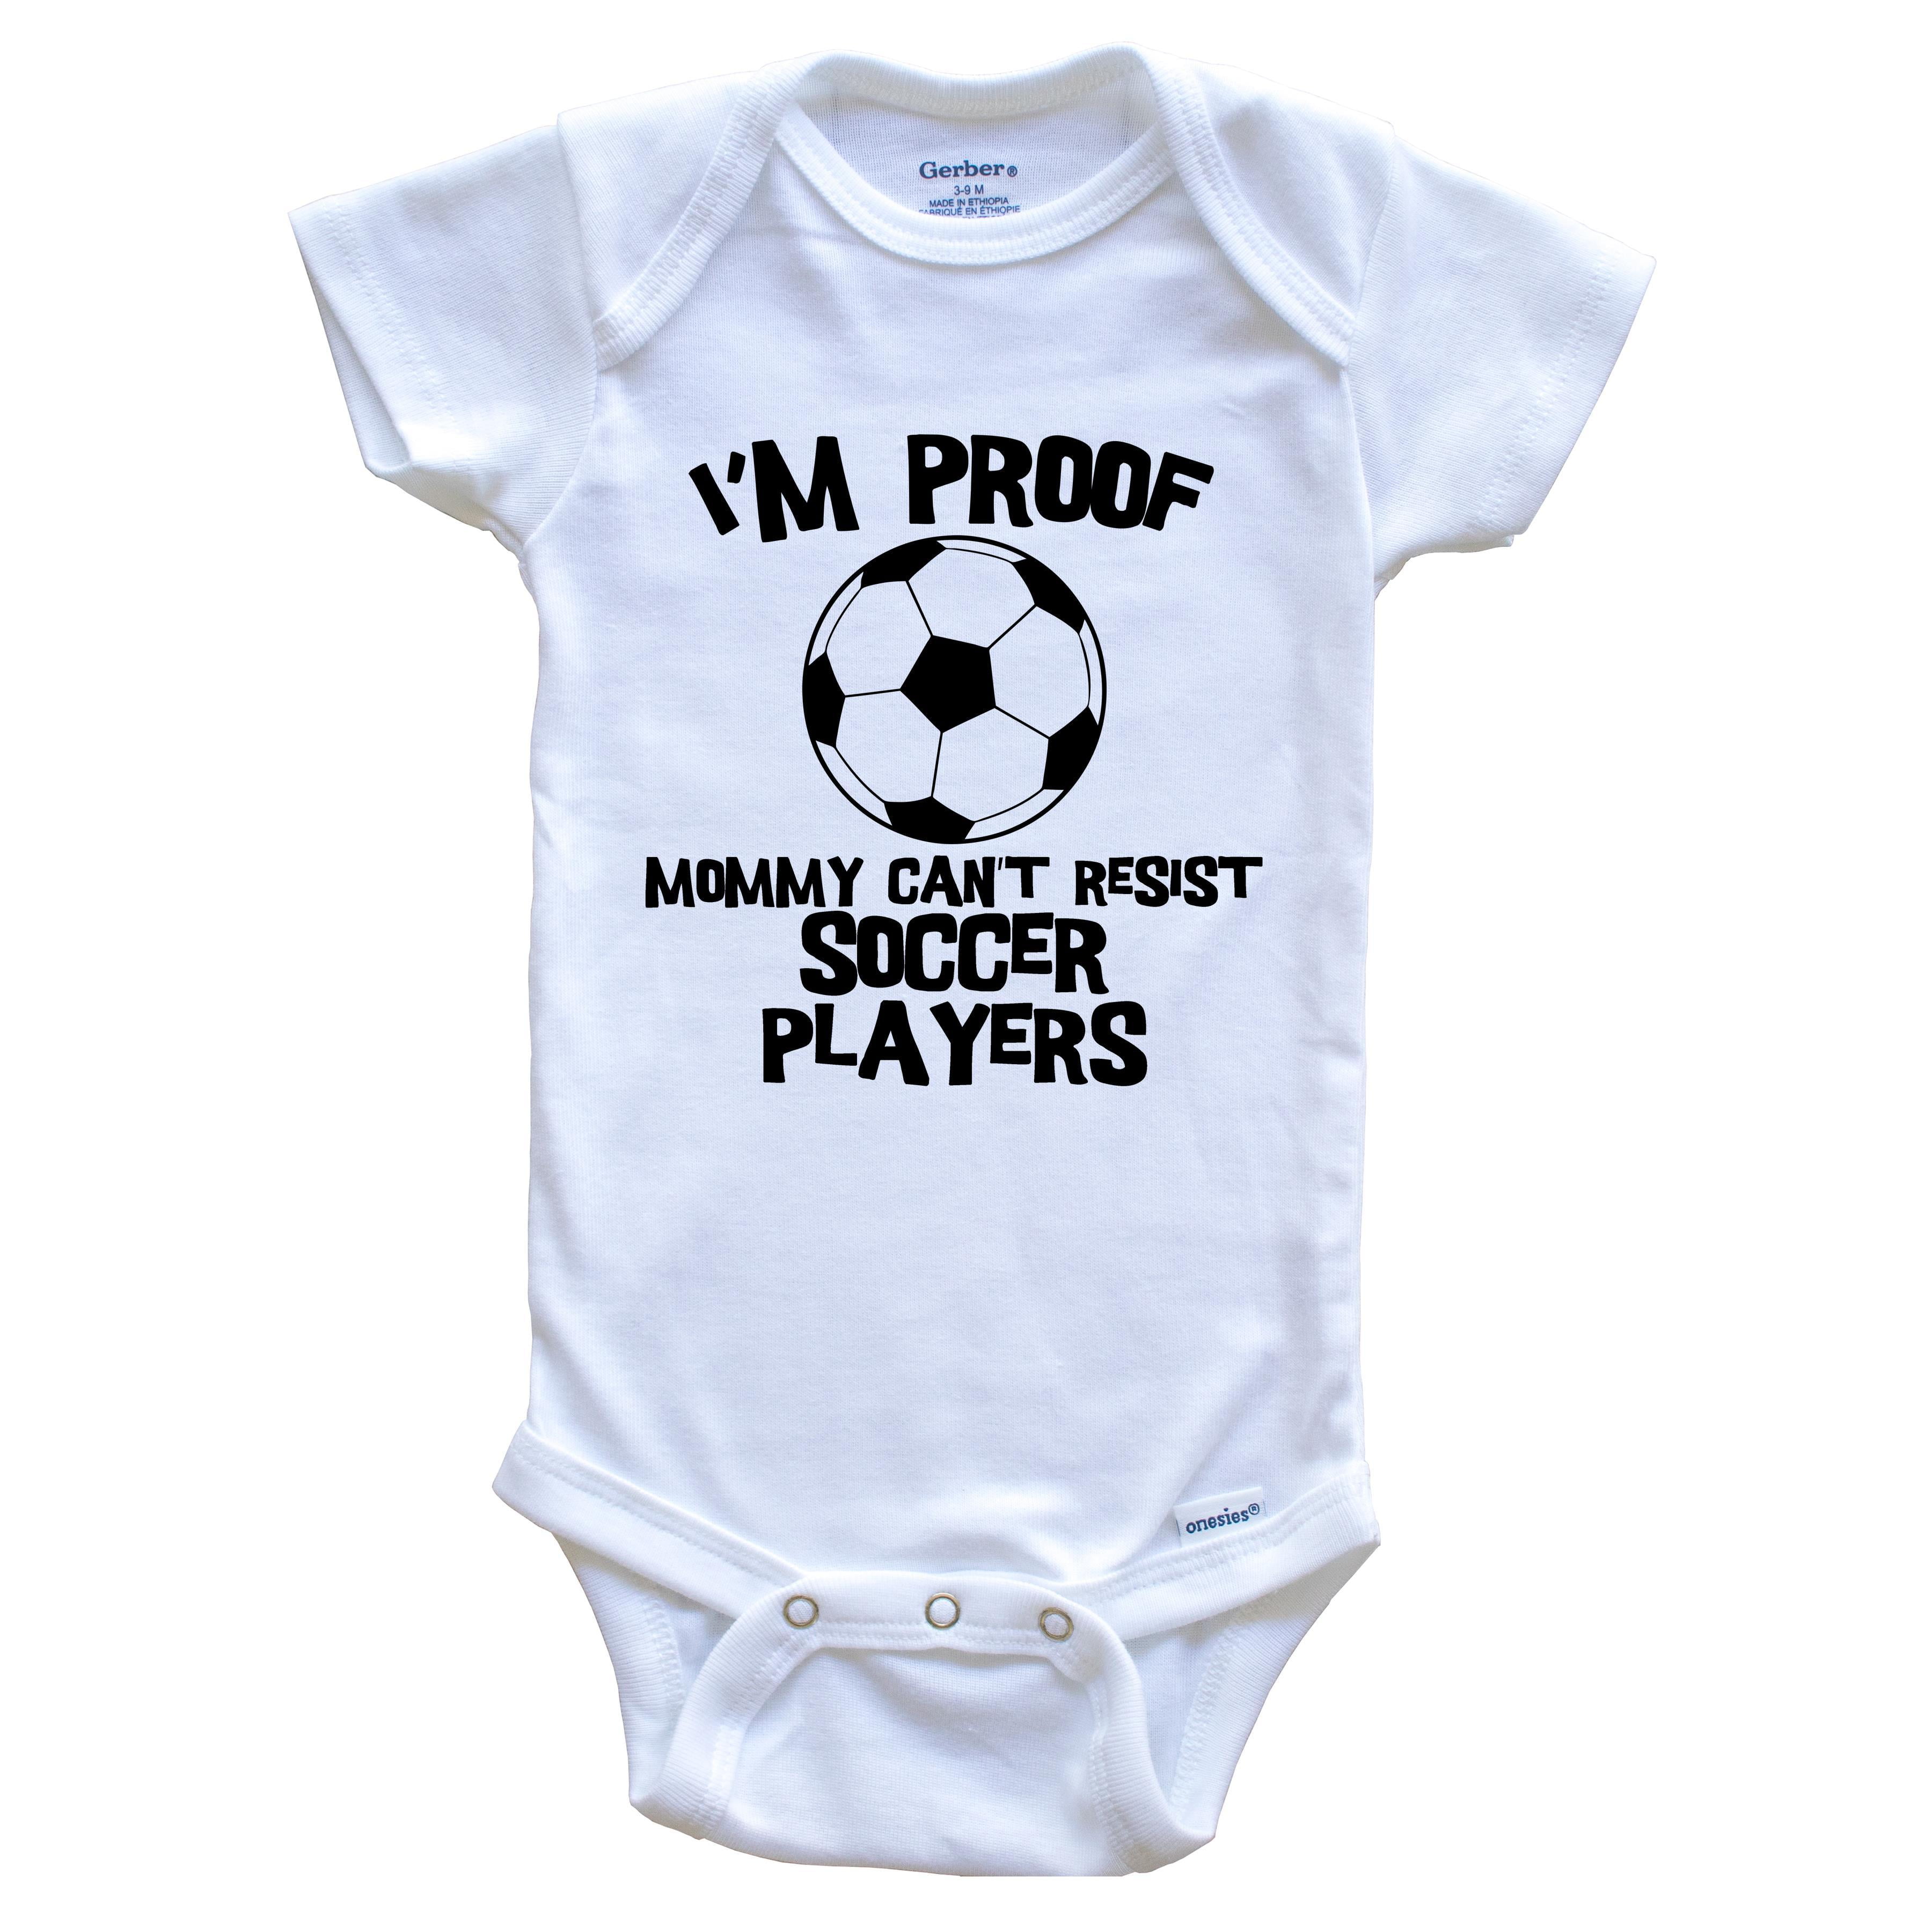 CHELSEA BABY TEAM FOOTBALL FAN BABYGROW BABY GROW ALL SIZES 0 24 months ^ 